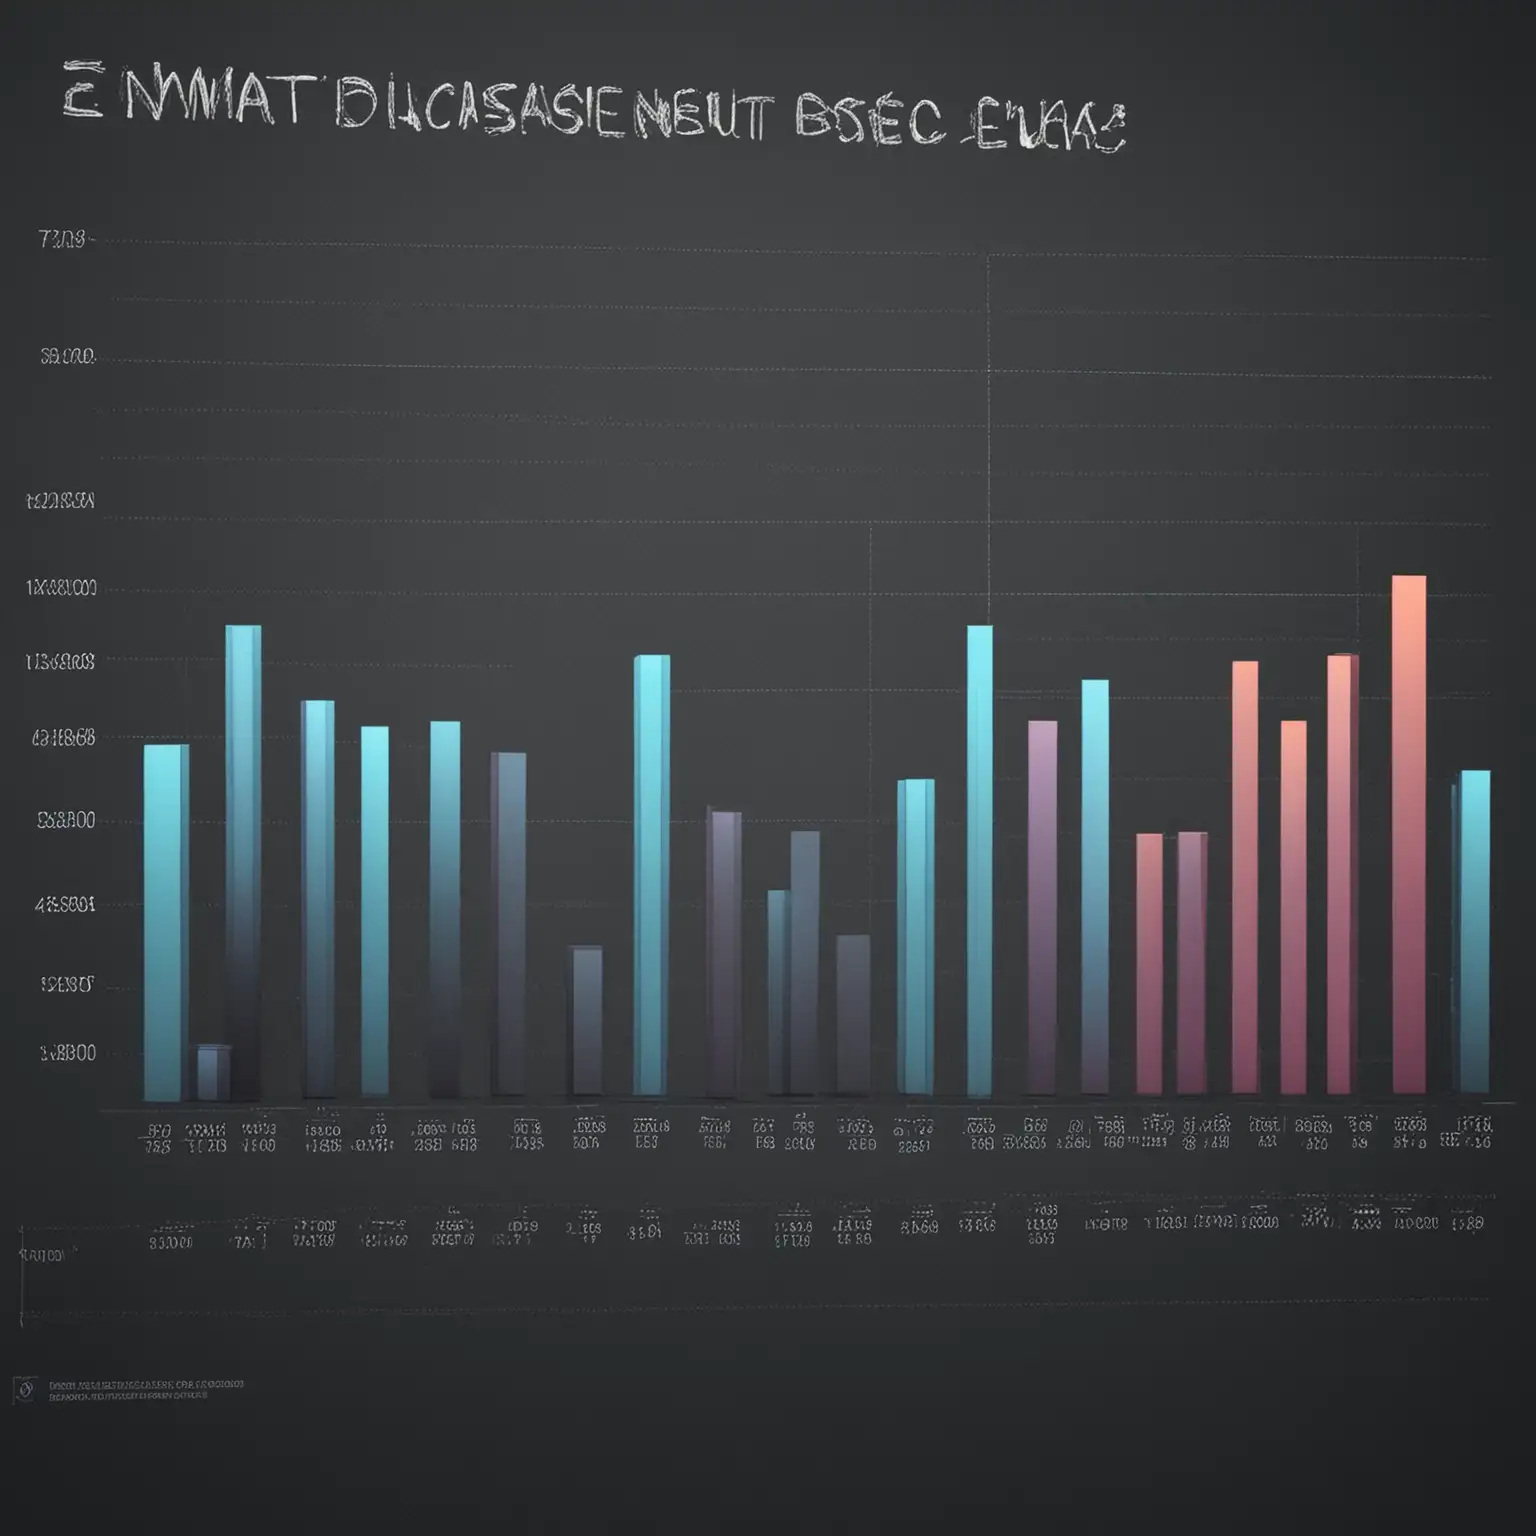 create a stock market bar chart in high resolution, with no numbers.
